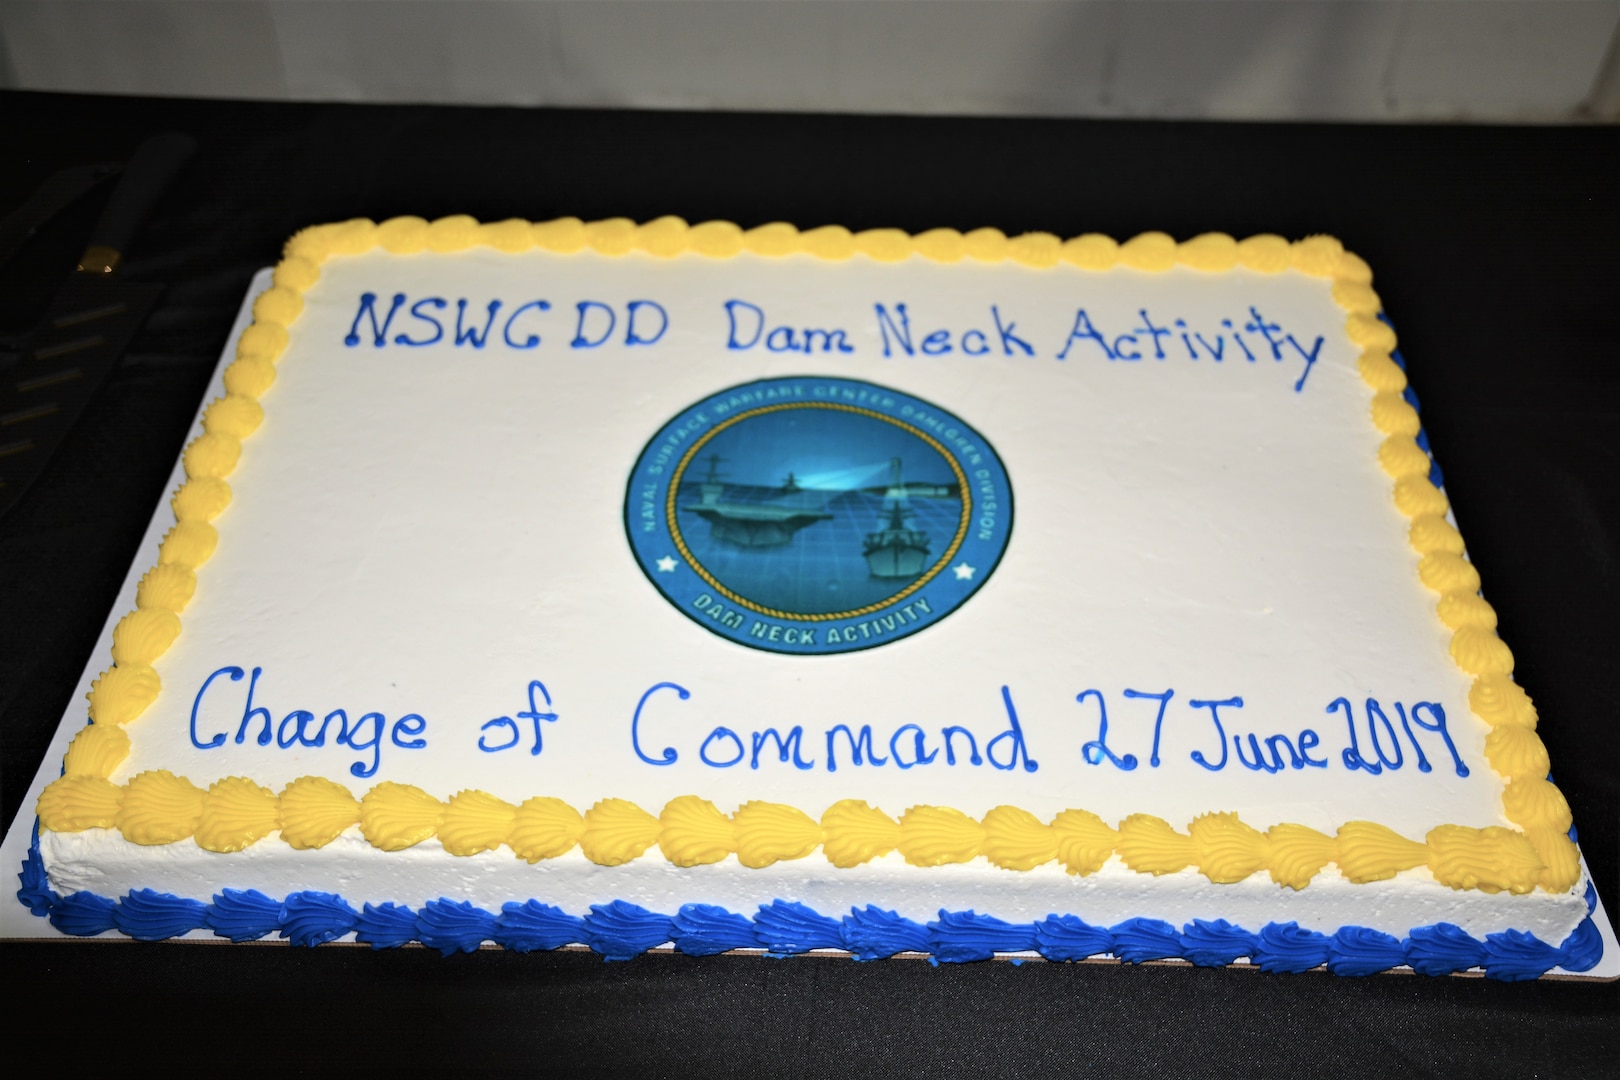 IMAGE: Cake and refreshments were available to guests following Naval Surface Warfare Center Dahlgren Division, Dam Neck Activity’s Change of Command ceremony June 27. More than 200 Sailors and guests attended a traditional ceremony at Naval Air Station Oceana’s Center for Naval Aviation Technical Training Unit’s ceremonial hangar aboard NAS Oceana where Cmdr. Andrew Hoffman was relieved of command by Cmdr. Joseph Oravec, who became the command’s 28th commanding officer.